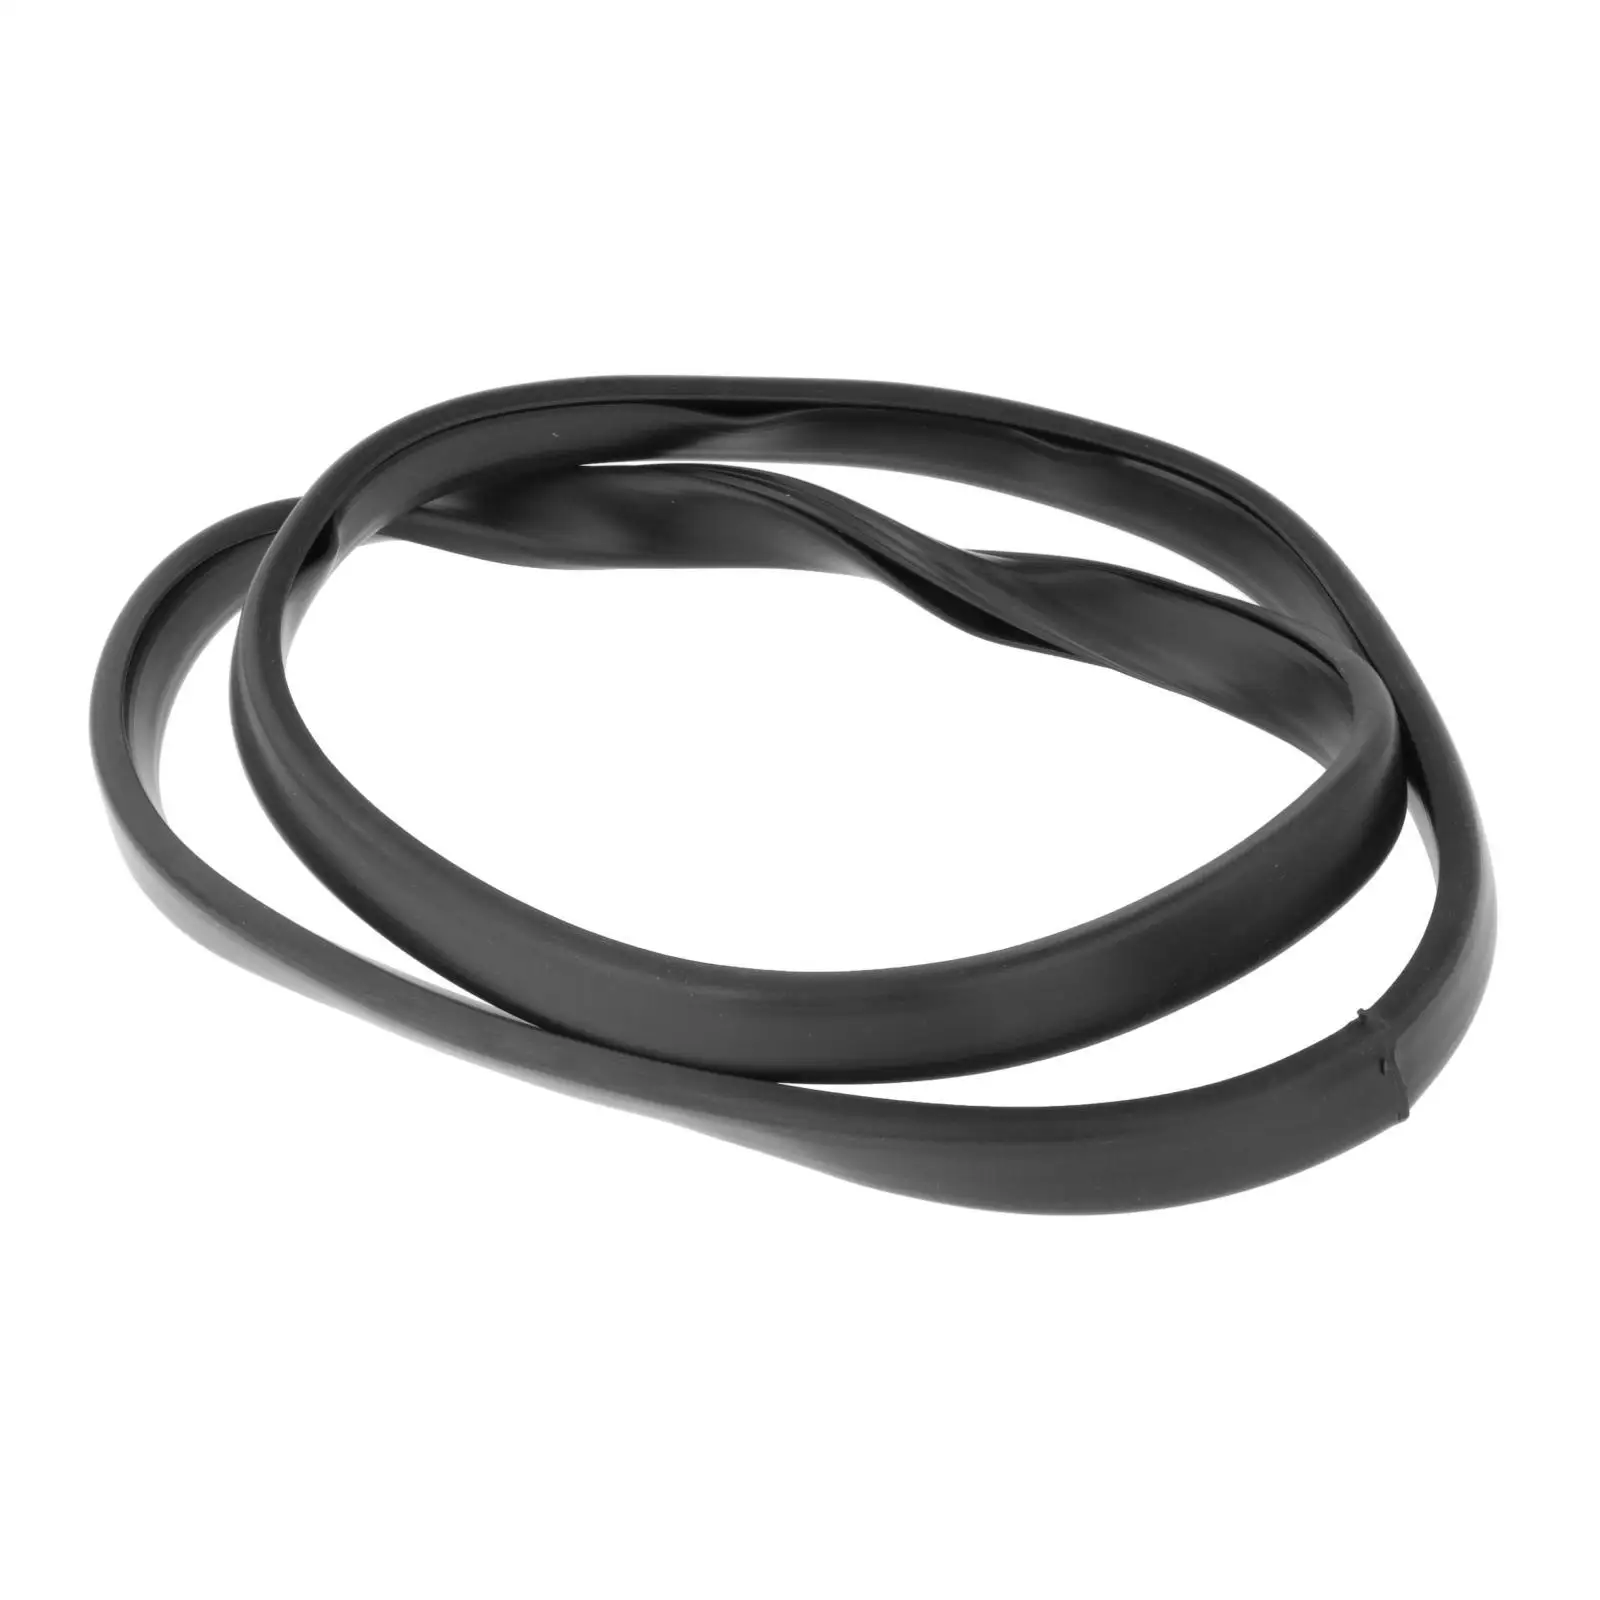 3F3-67501 Anti-Aging Rubber Seal Fit for 2T Outboard Motor Parts